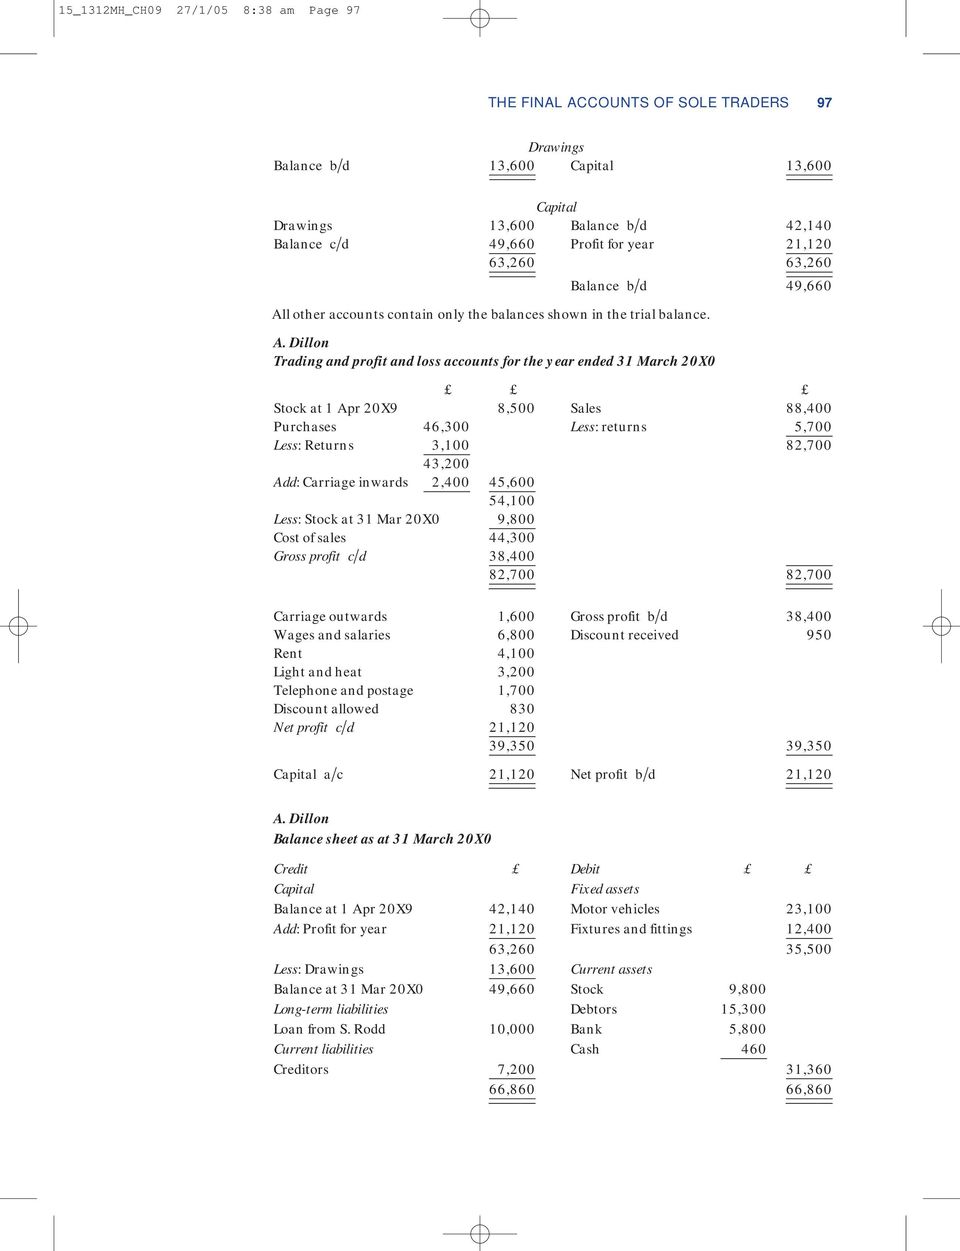 l other accounts contain only the balances shown in the trial balance. A.